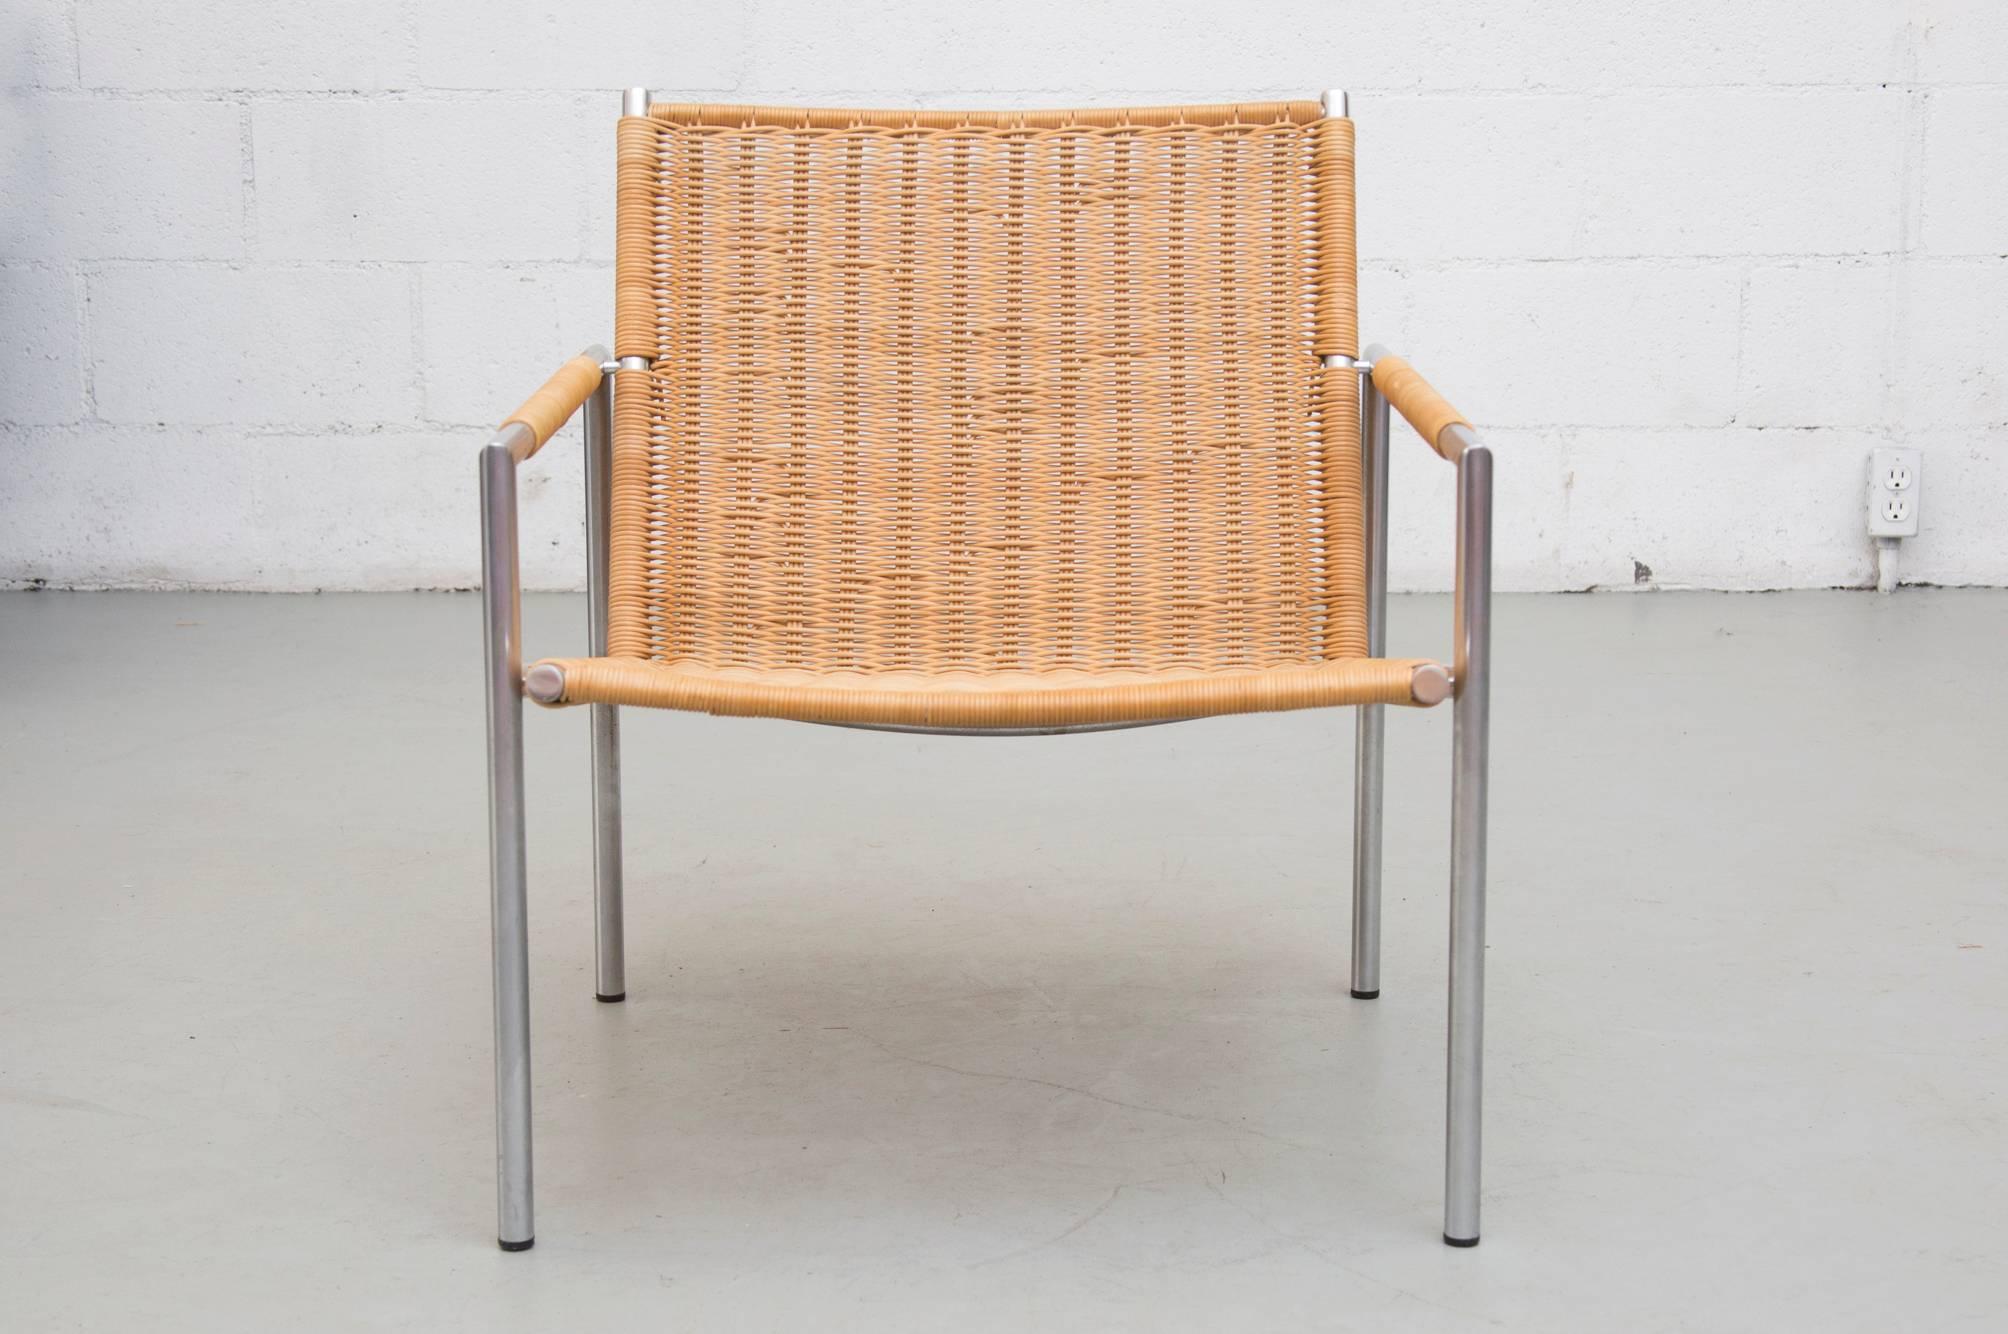 One of Martin Visser's well-known lounge chair designs of the 1960s. Lounge chair with tubular chrome metal frame and woven rattan seat and back, with rattan wrap detailing on armrests. In good original condition with visible signs of wear to the